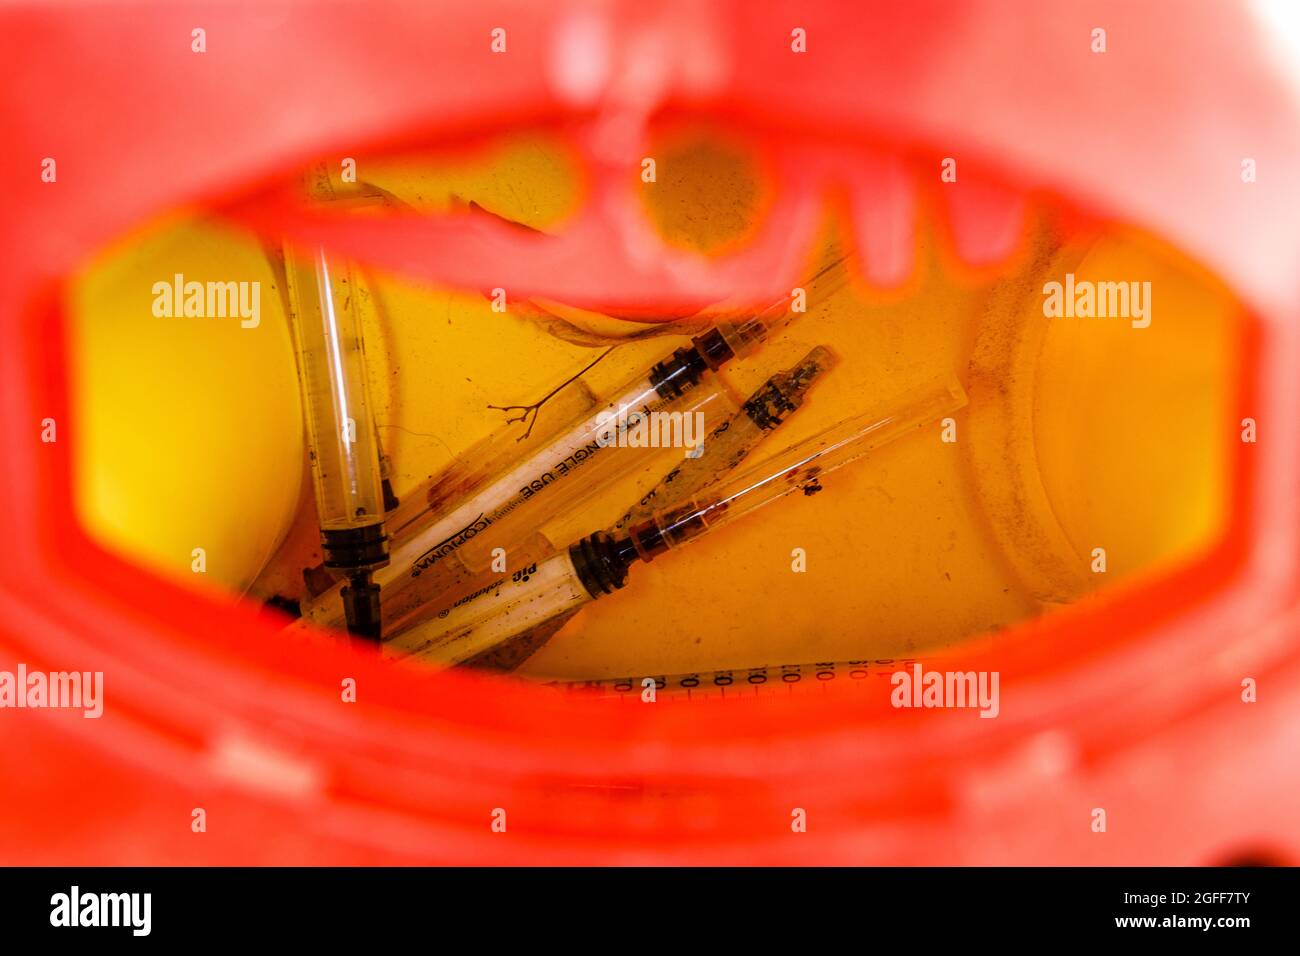 Used Heroin Syringes in Sharps Container Stock Photo